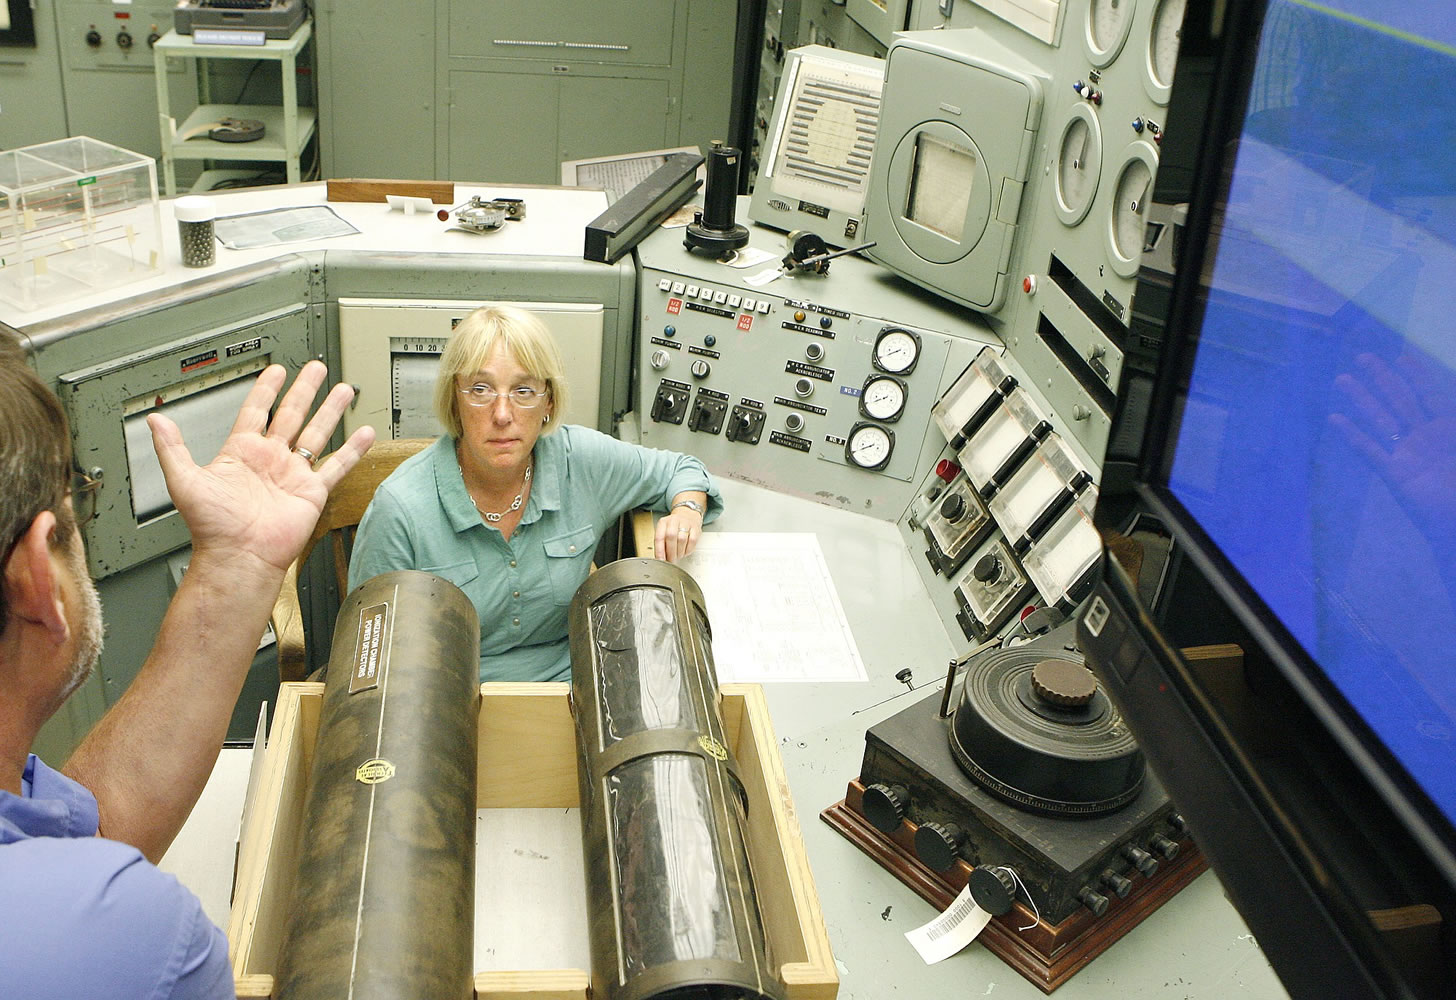 U.S. Sen. Patty Murray sits at the B Reactor Control Room desk during a tour of the Hanford nuclear reservation Thursday in Hanford.